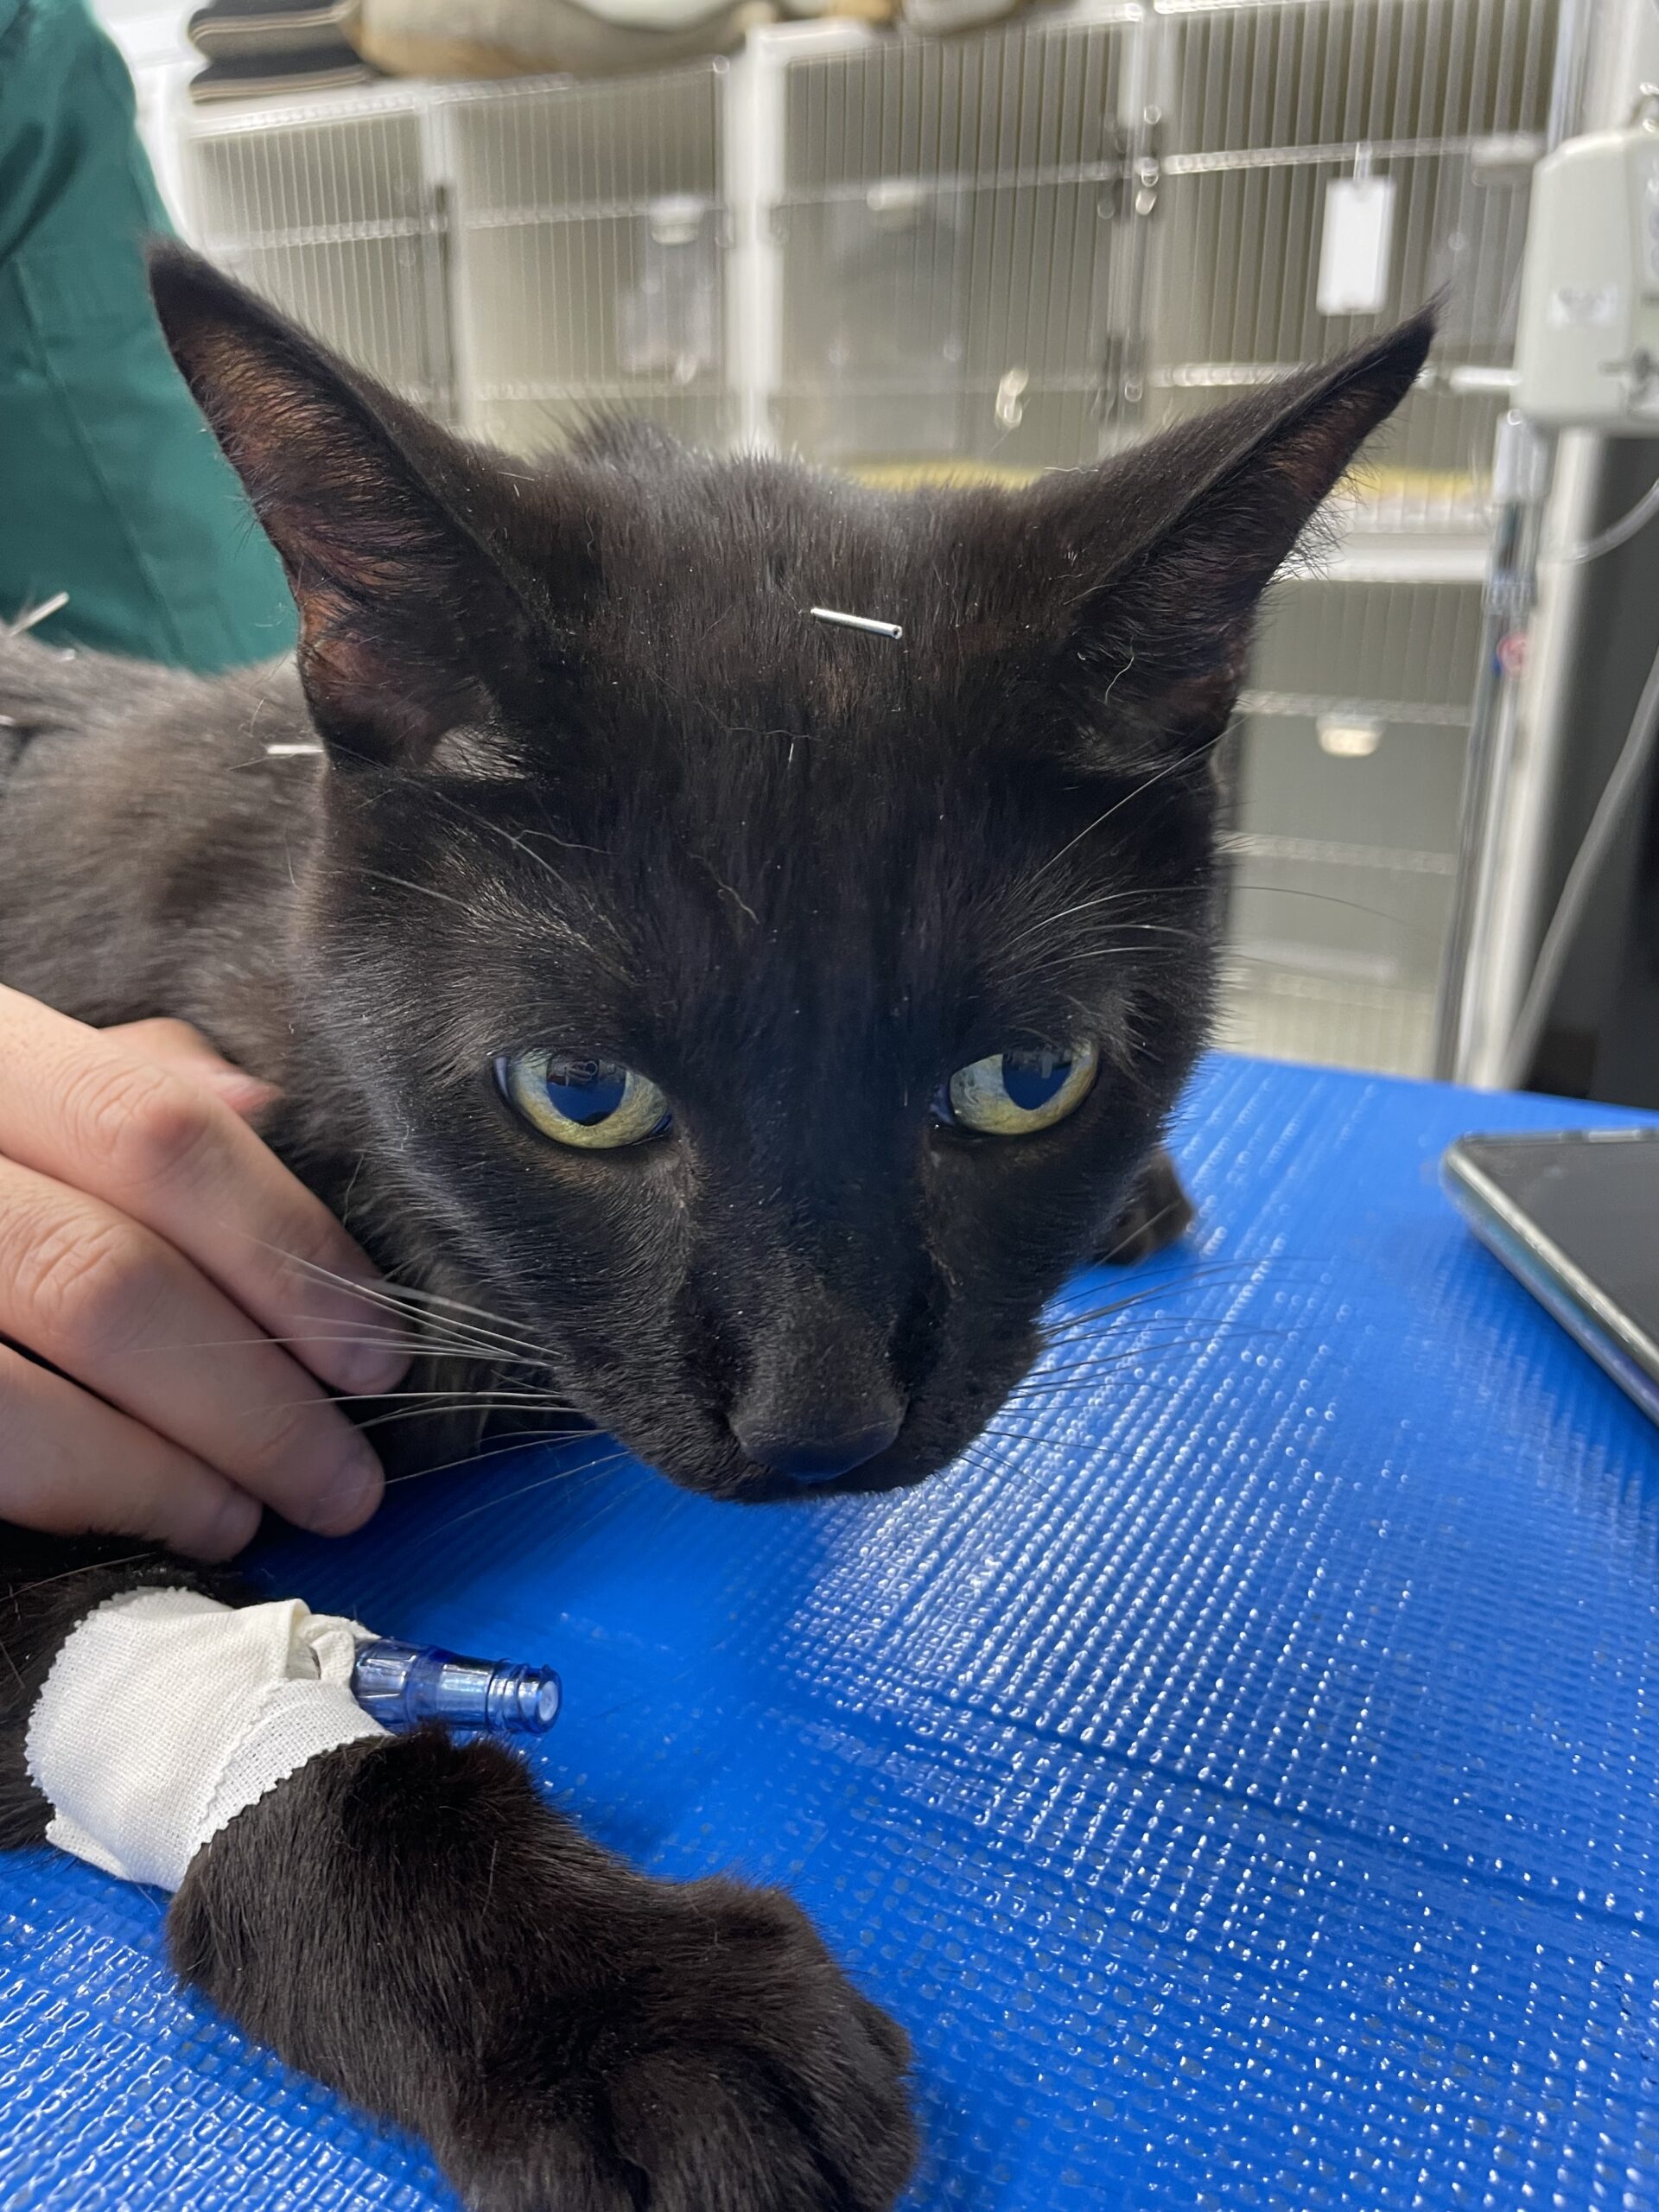 An injured black cat with a bandaged leg, sitting calmly.